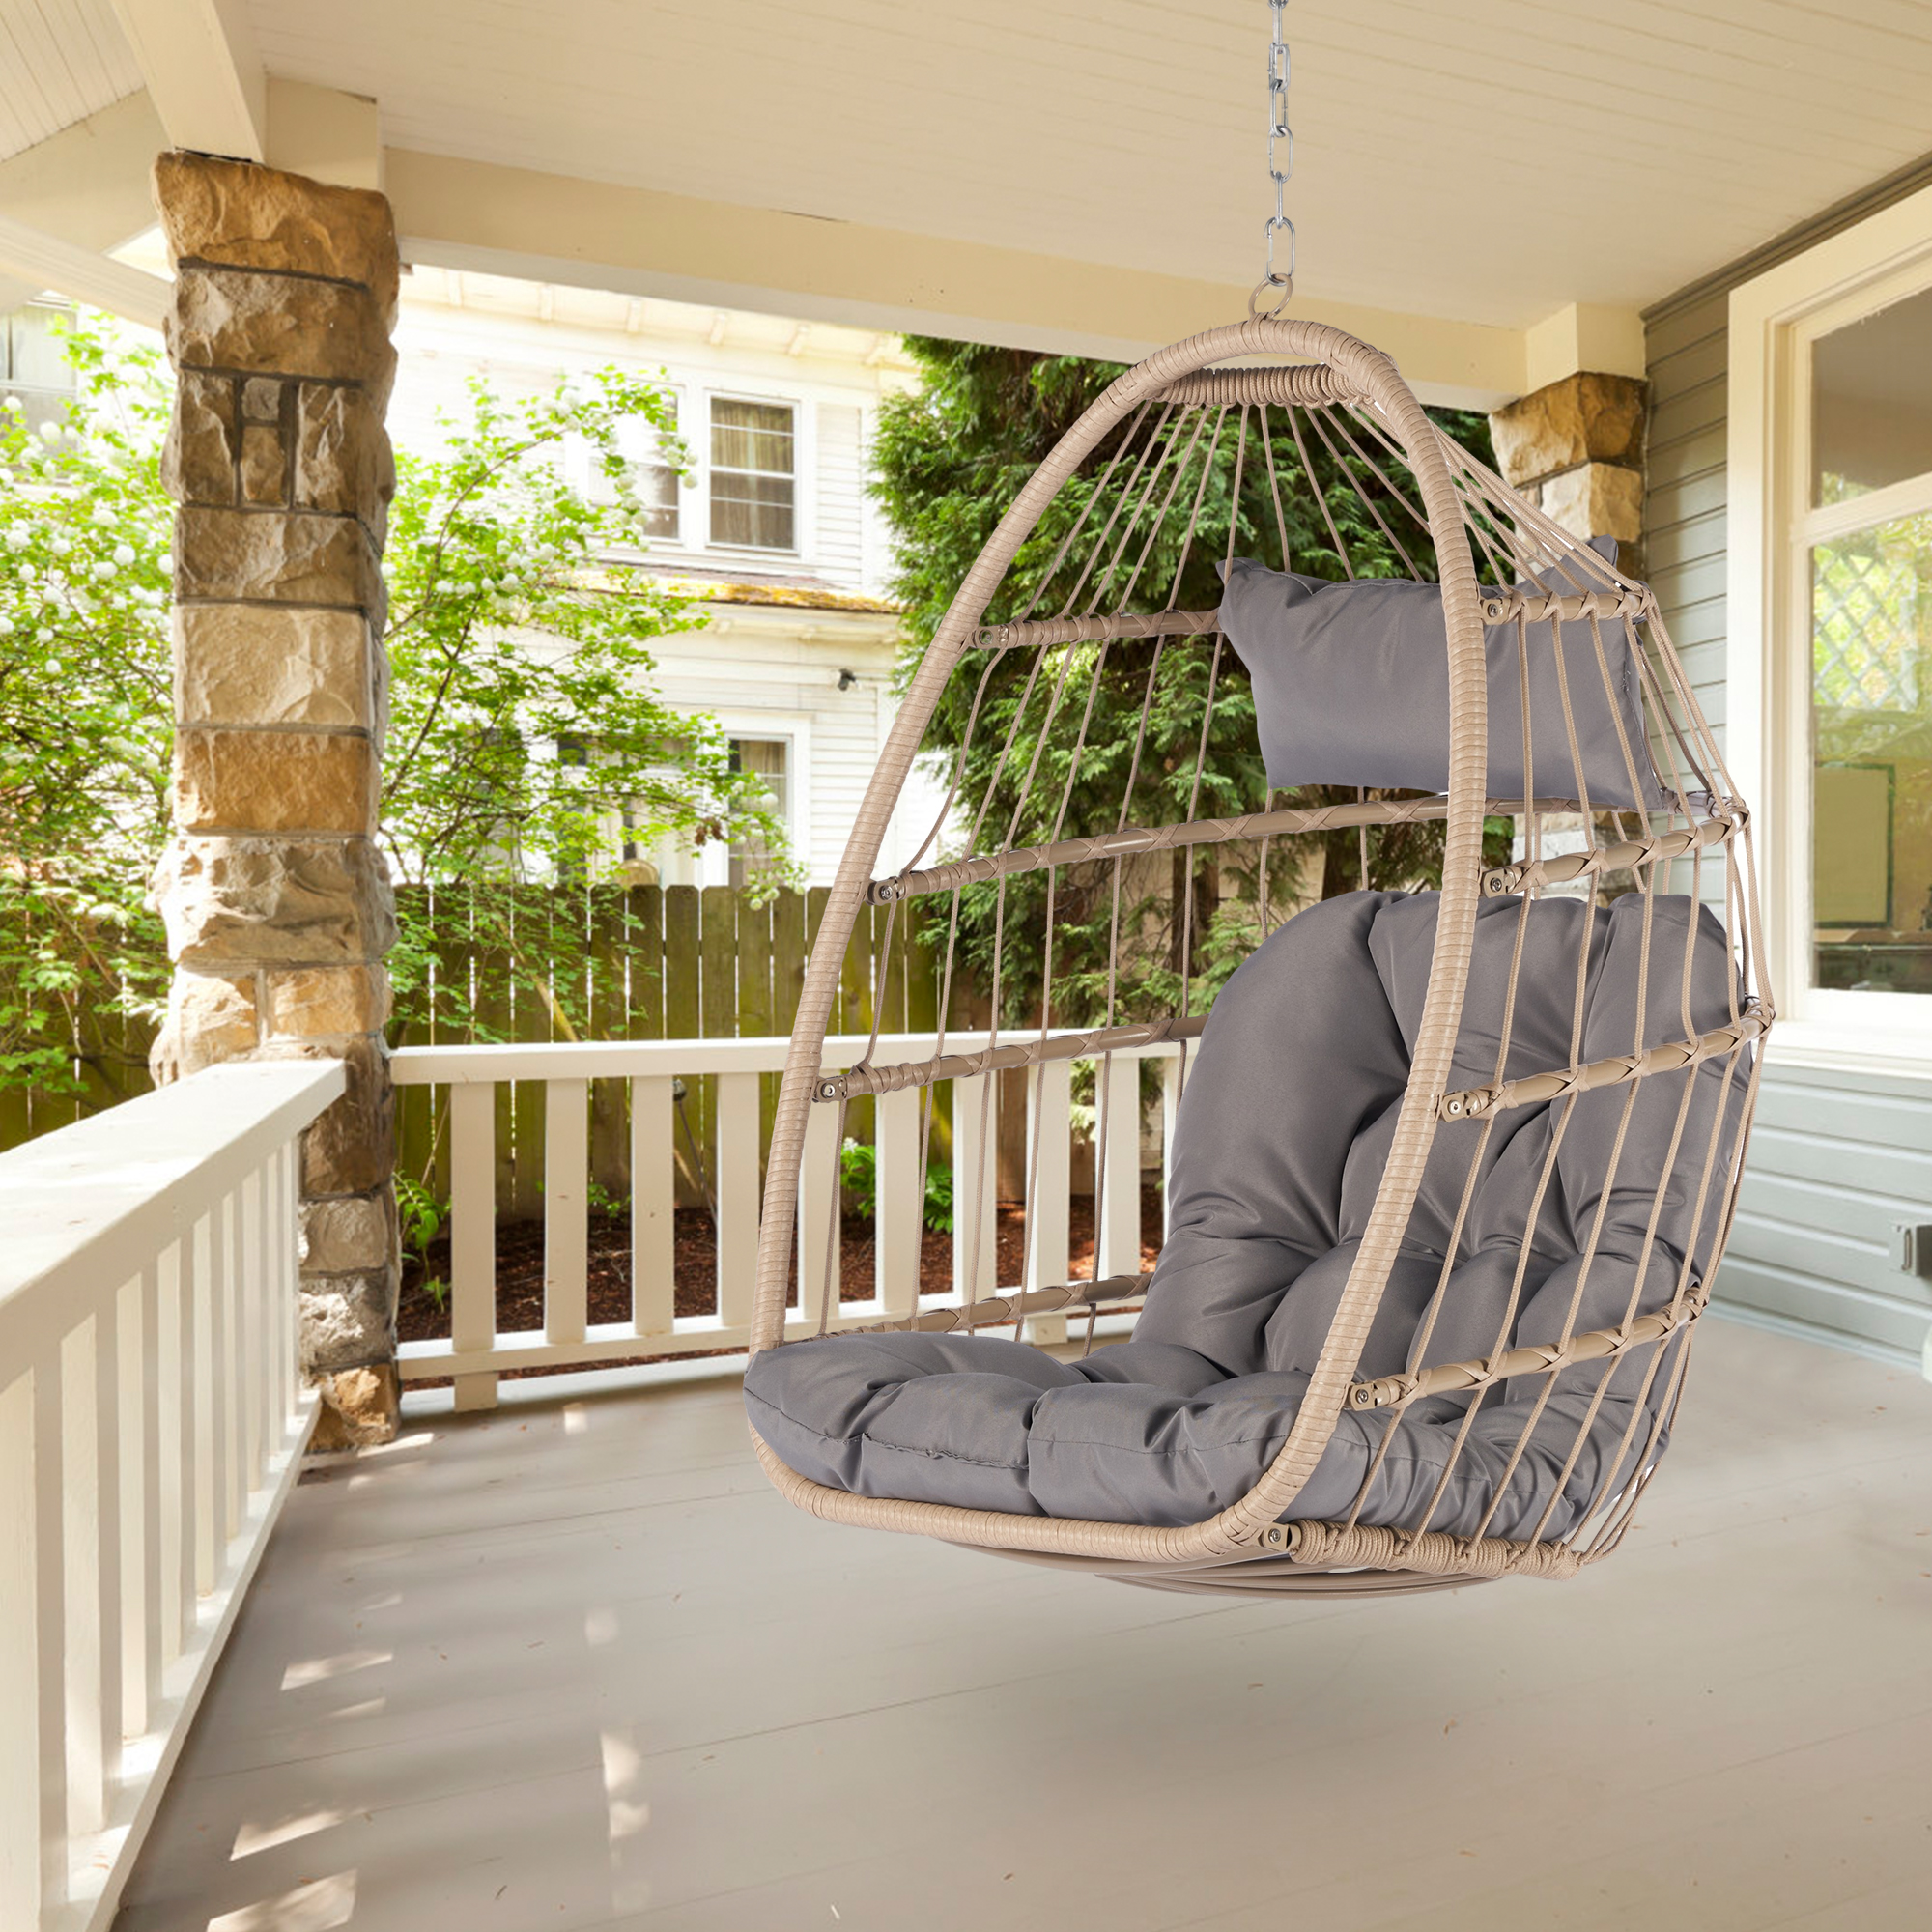 Patio Wicker Hanging Chair, Egg Chair Hammock Chair with UV Resistant Cushion and Pillow for Indoor Outdoor, Patio Backyard Balcony Lounge Rattan Swing Chair - image 1 of 6